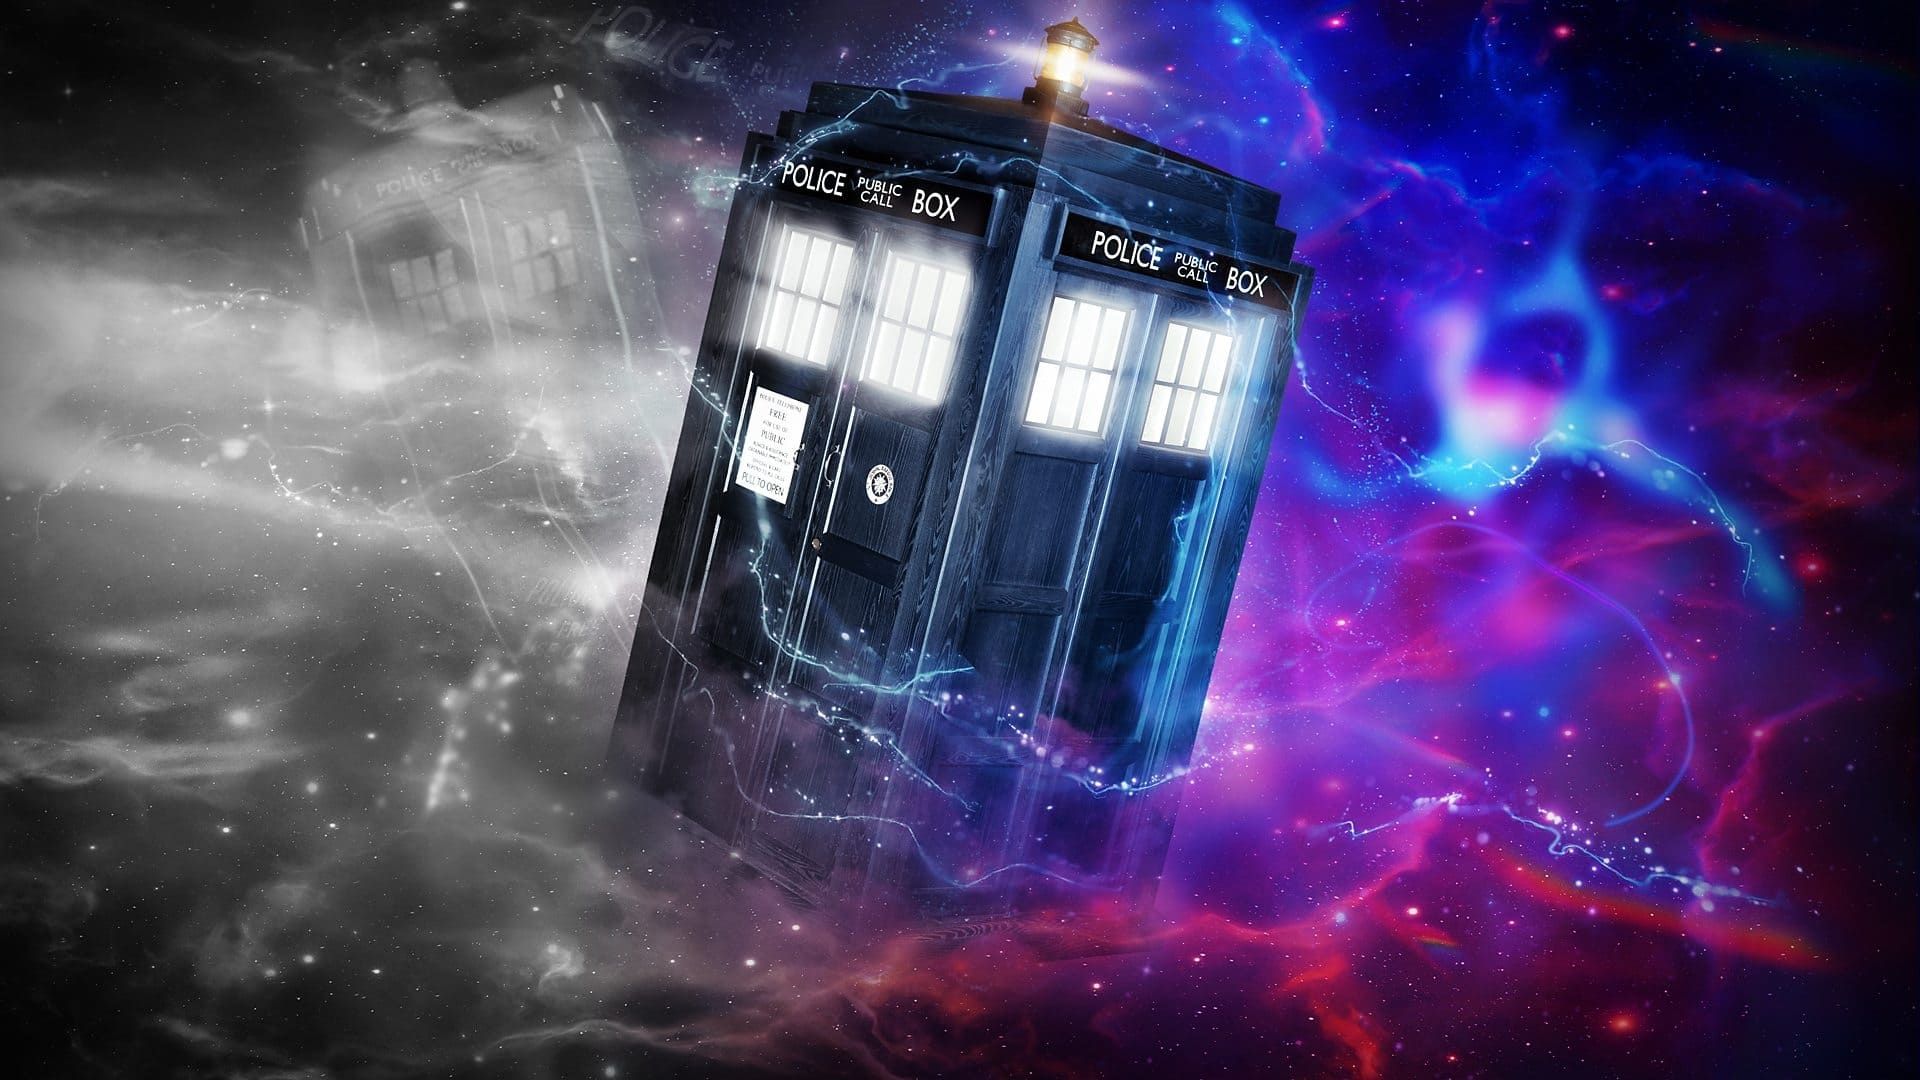 Doctor Who: Tales of the TARDIS background